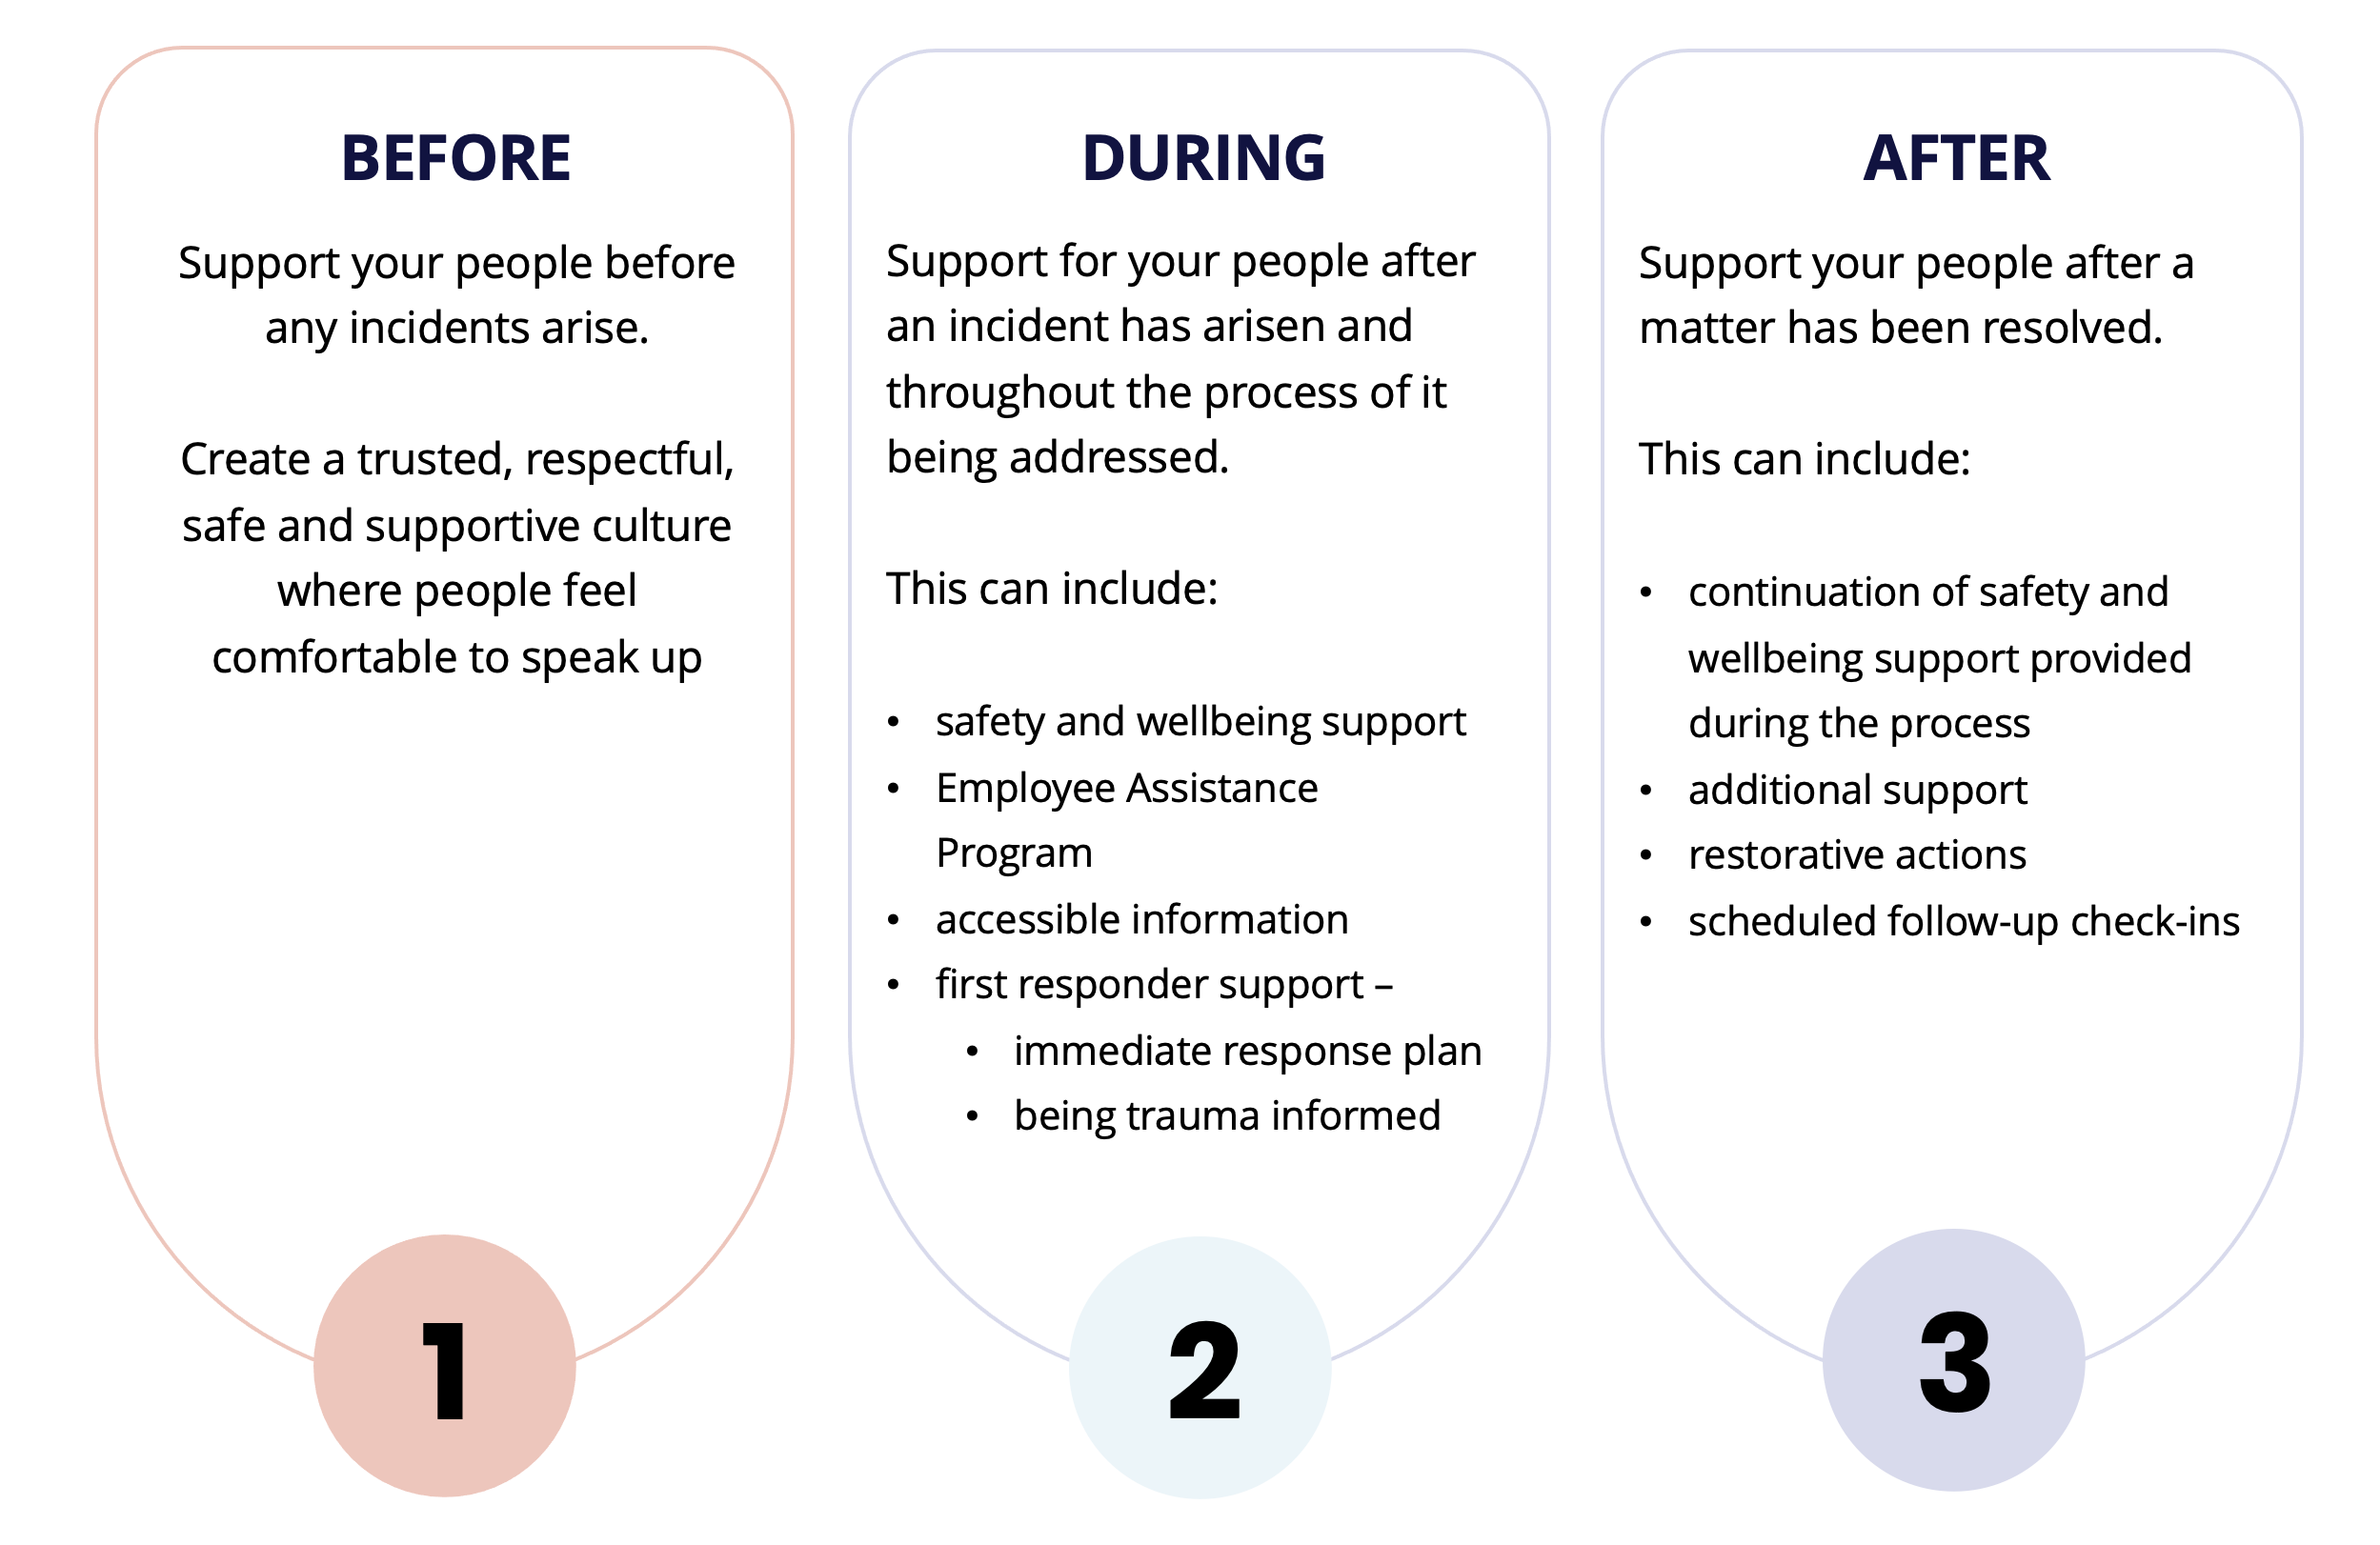 Graphic illustrating support for people before, during and after an incident